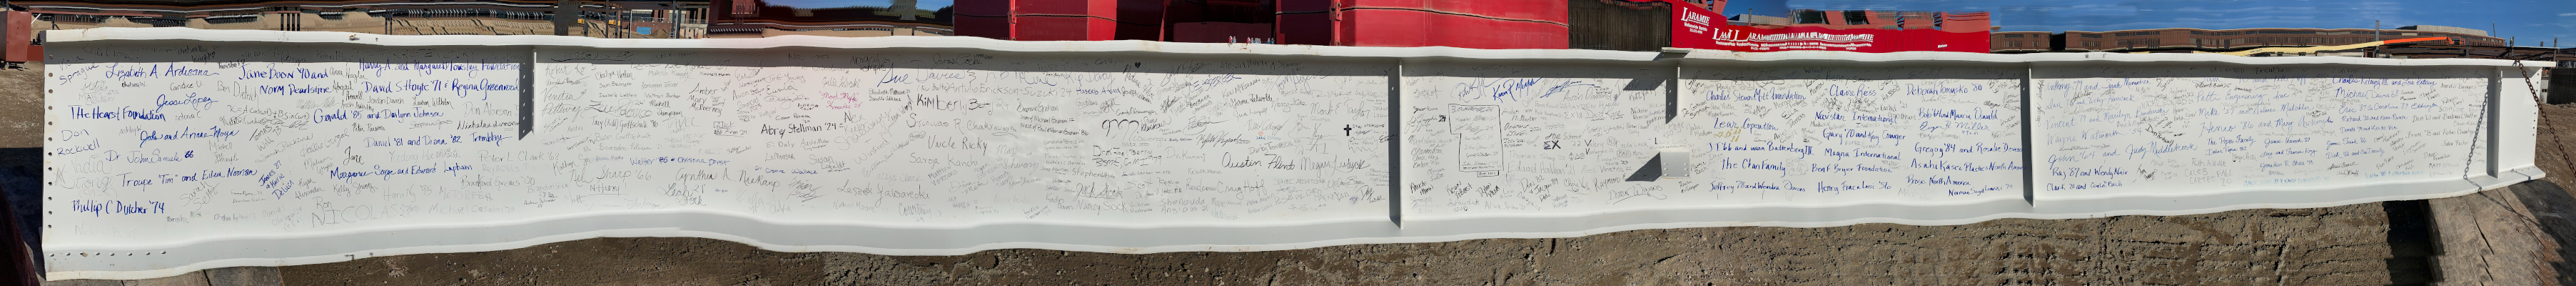 Full Learning Commons beam with donor signatures 